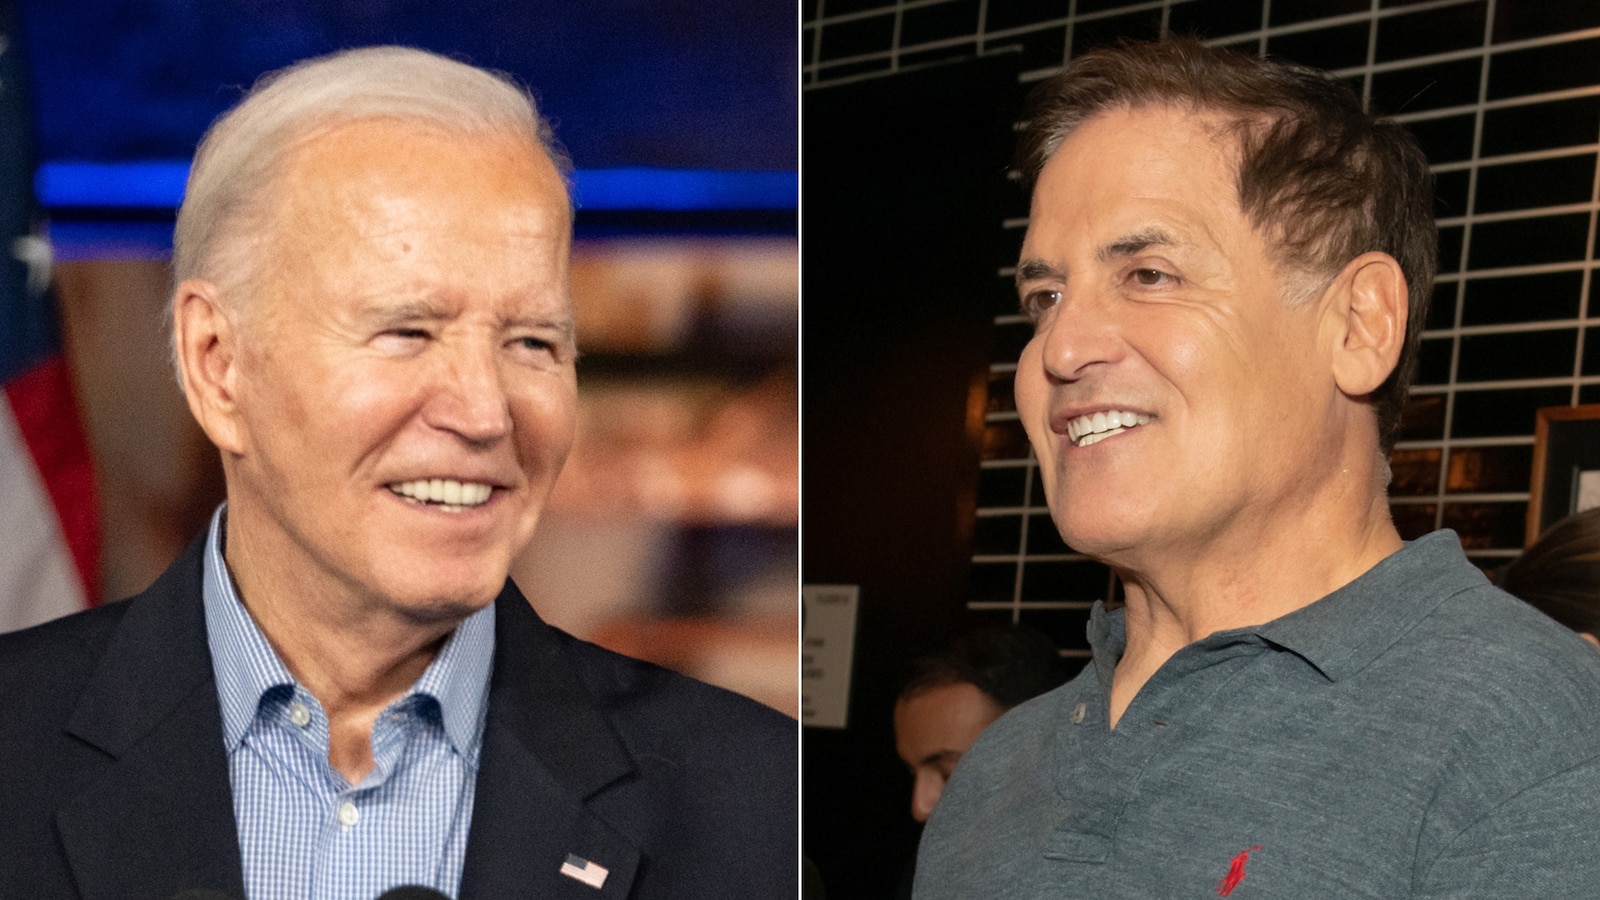 Mark Cuban attends fundraiser for Biden after voting for Haley in the primary